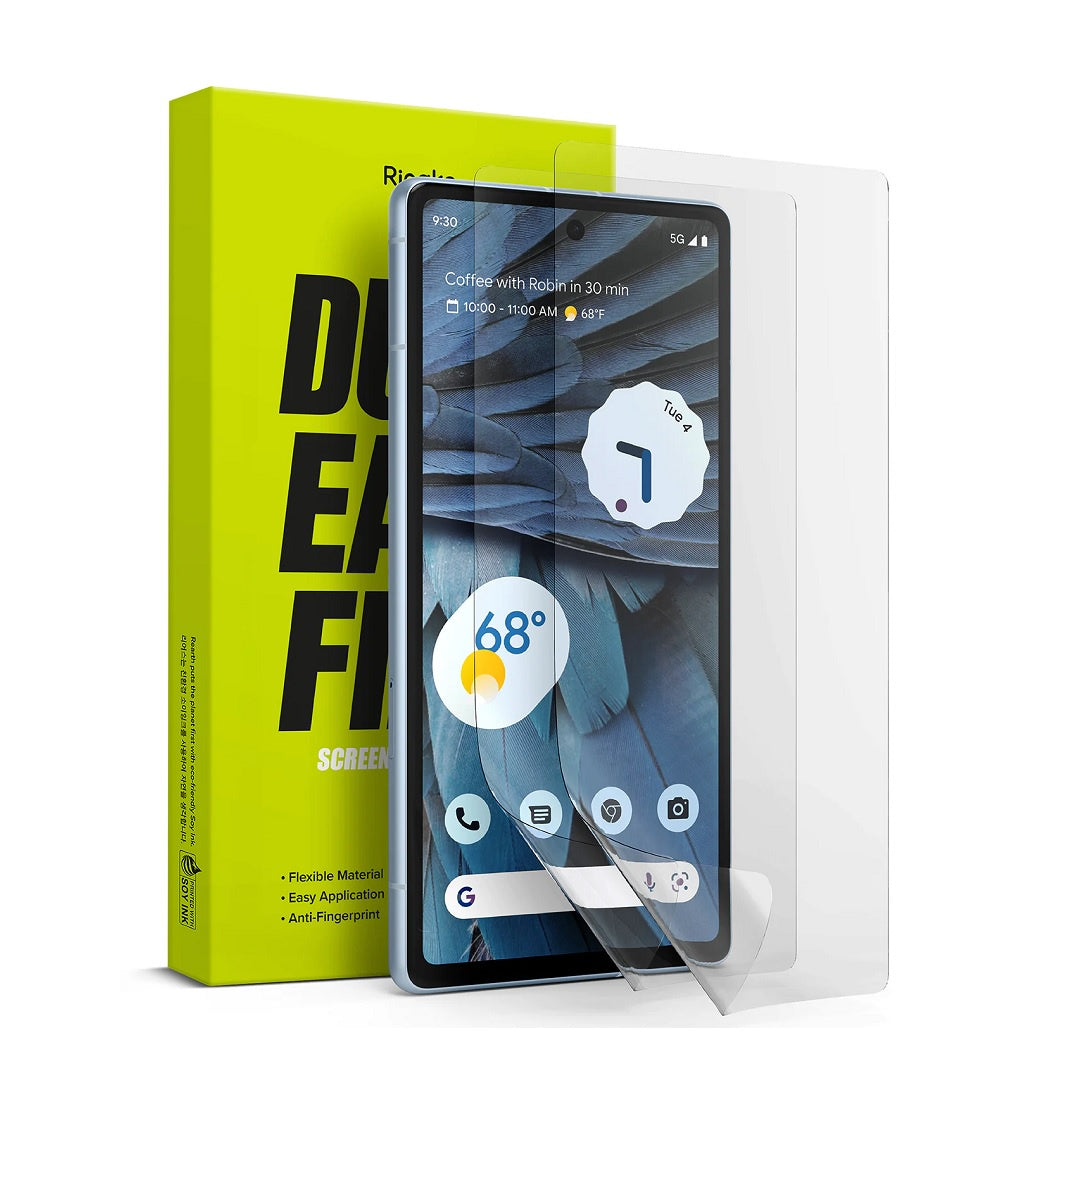 Google Pixel 7a Dual Easy Film Screen Protector By Ringke